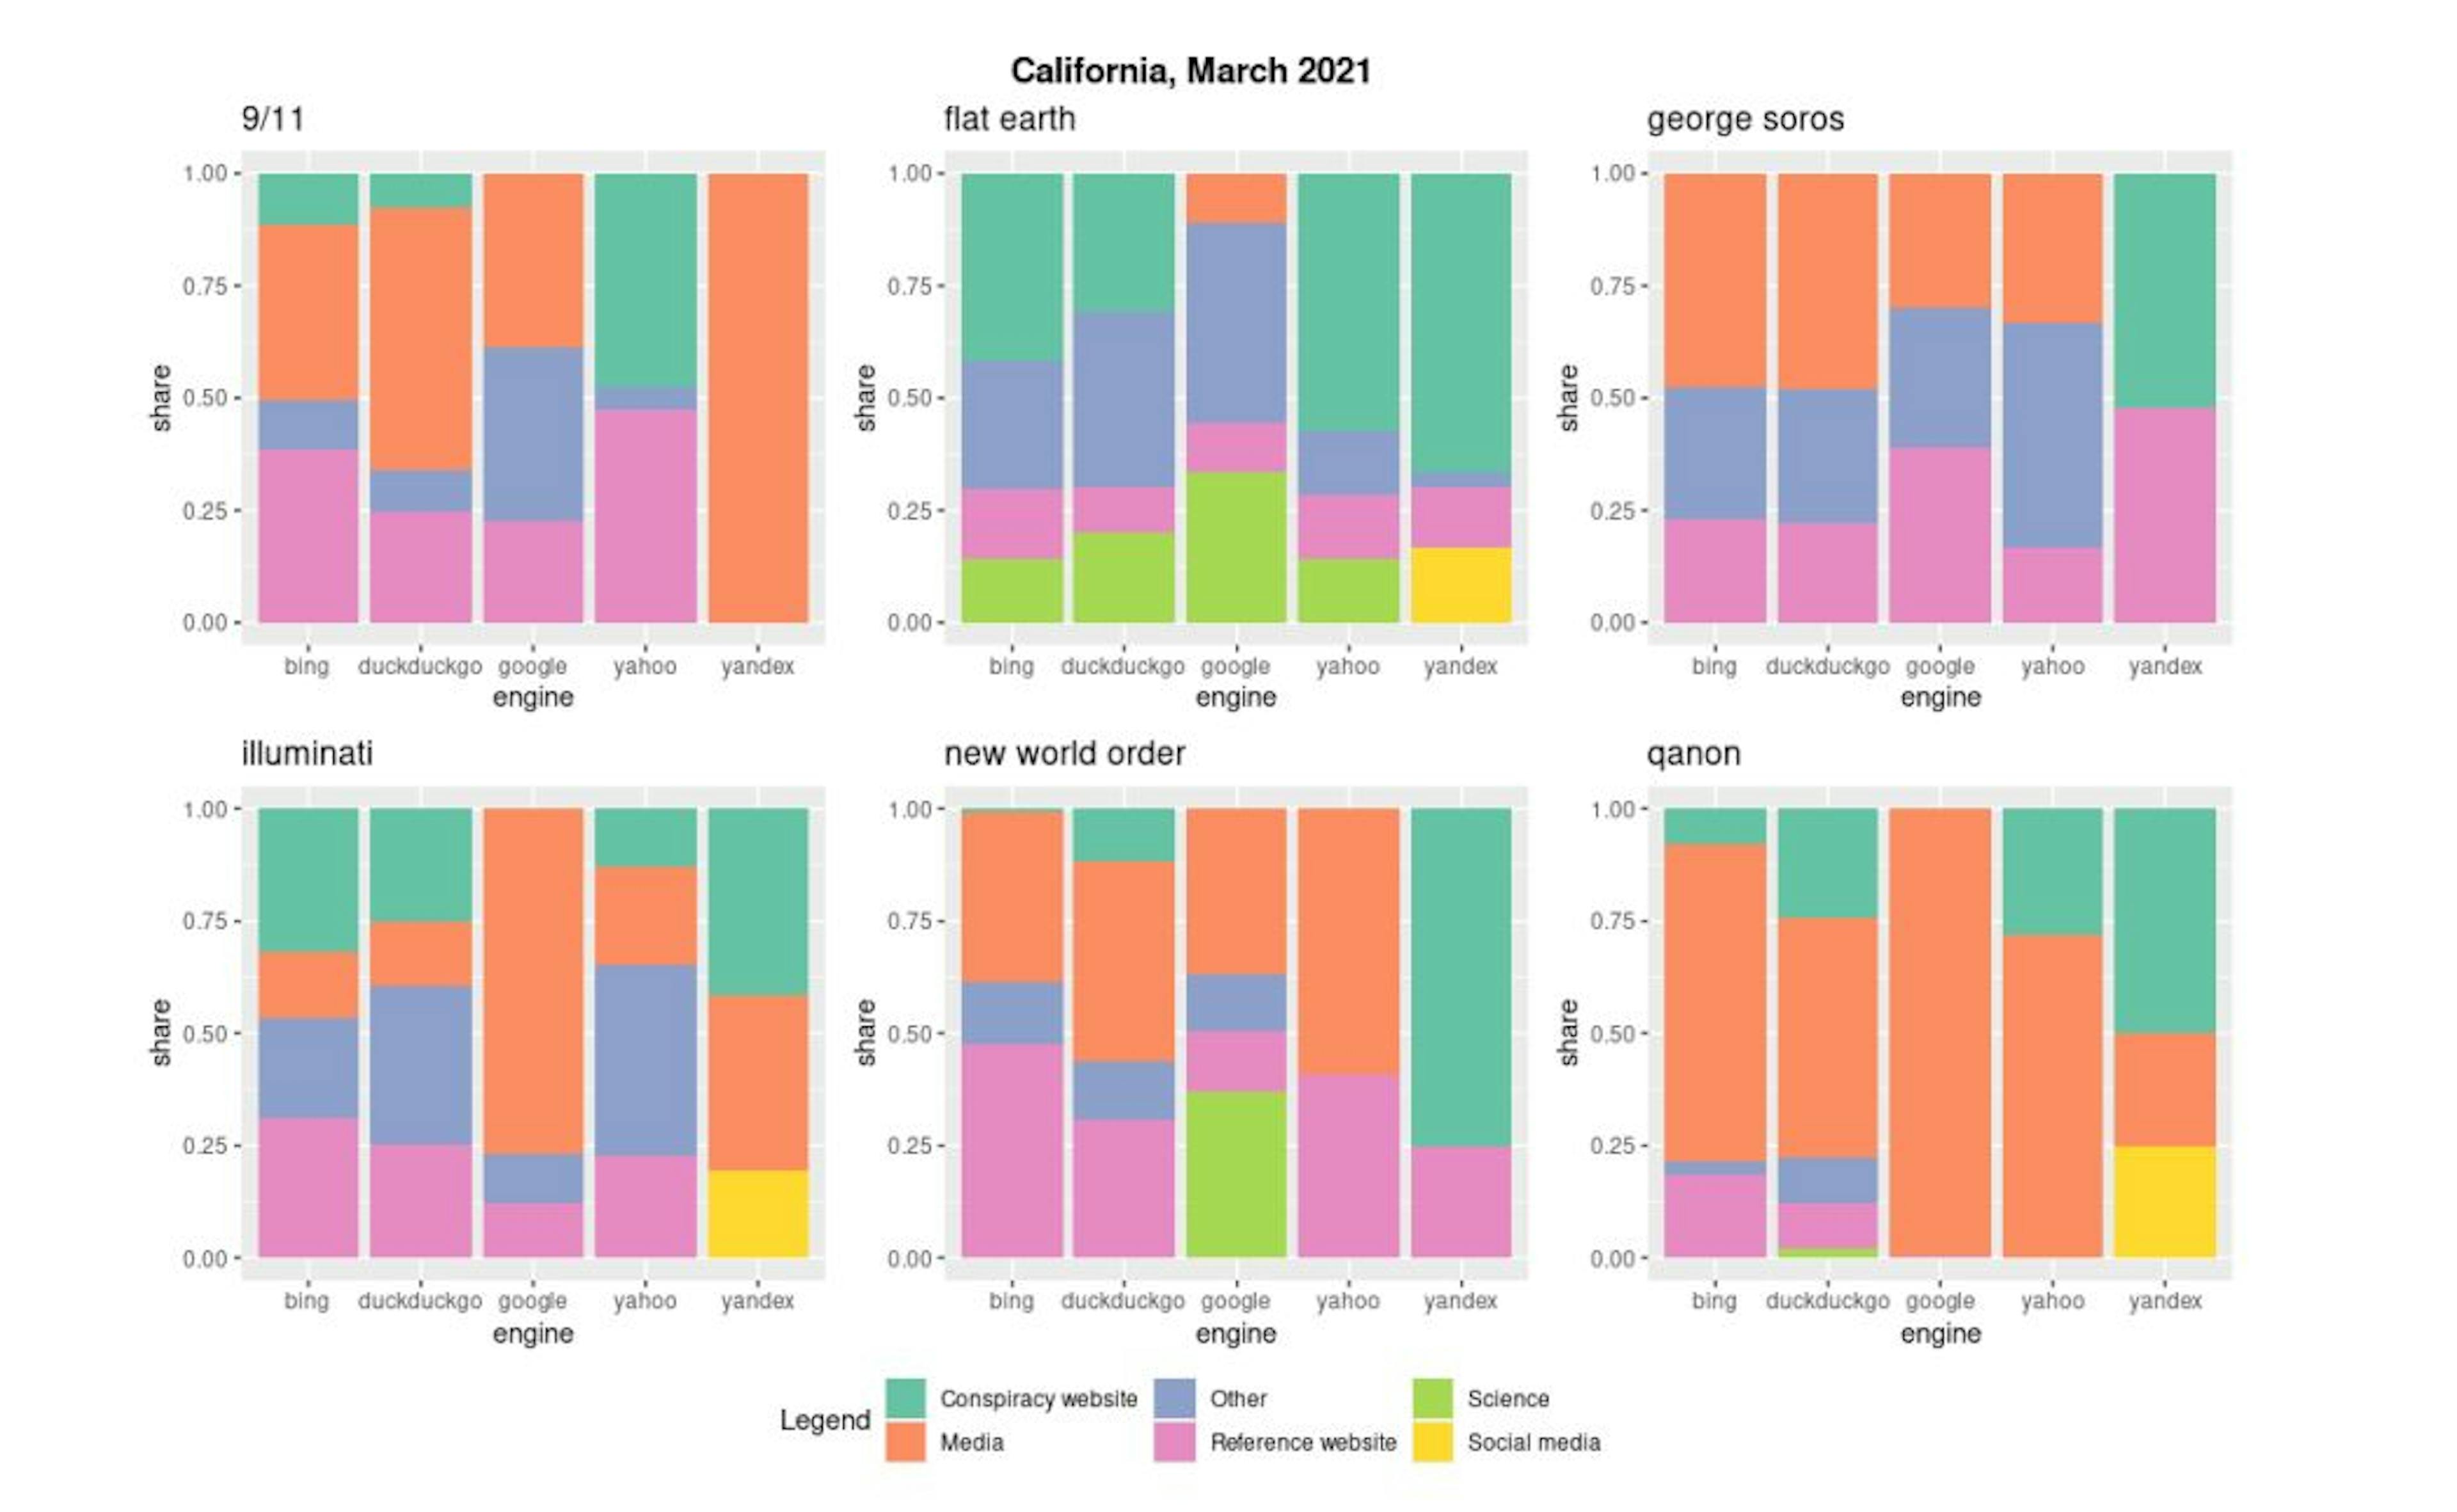 Figure 9. Prevalence of different source types per engine and query, California server, March 2021.